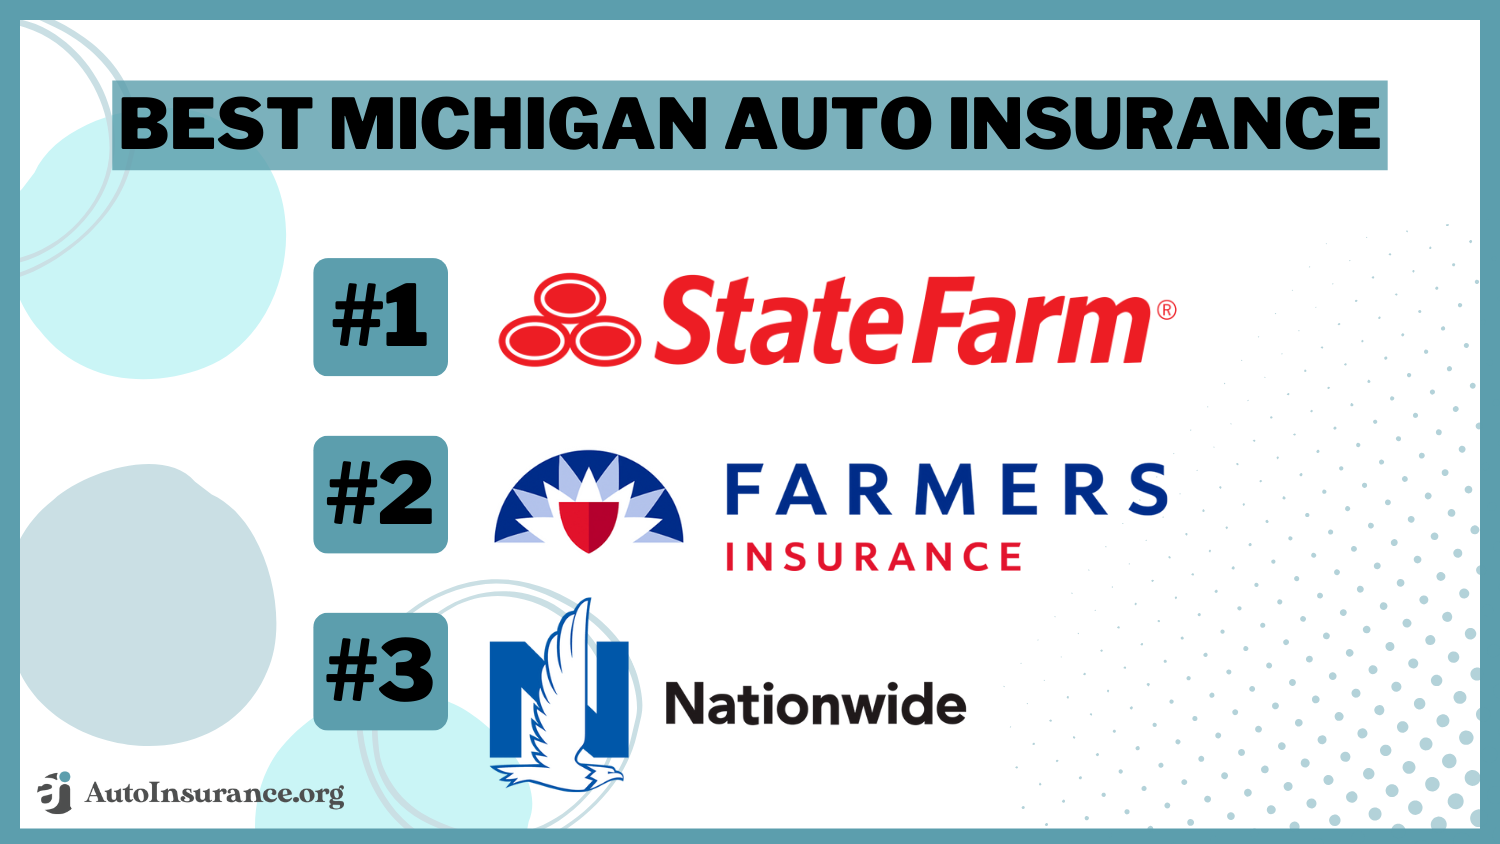 State Farm, Farmers, and Nationwide best Michigan auto insurance